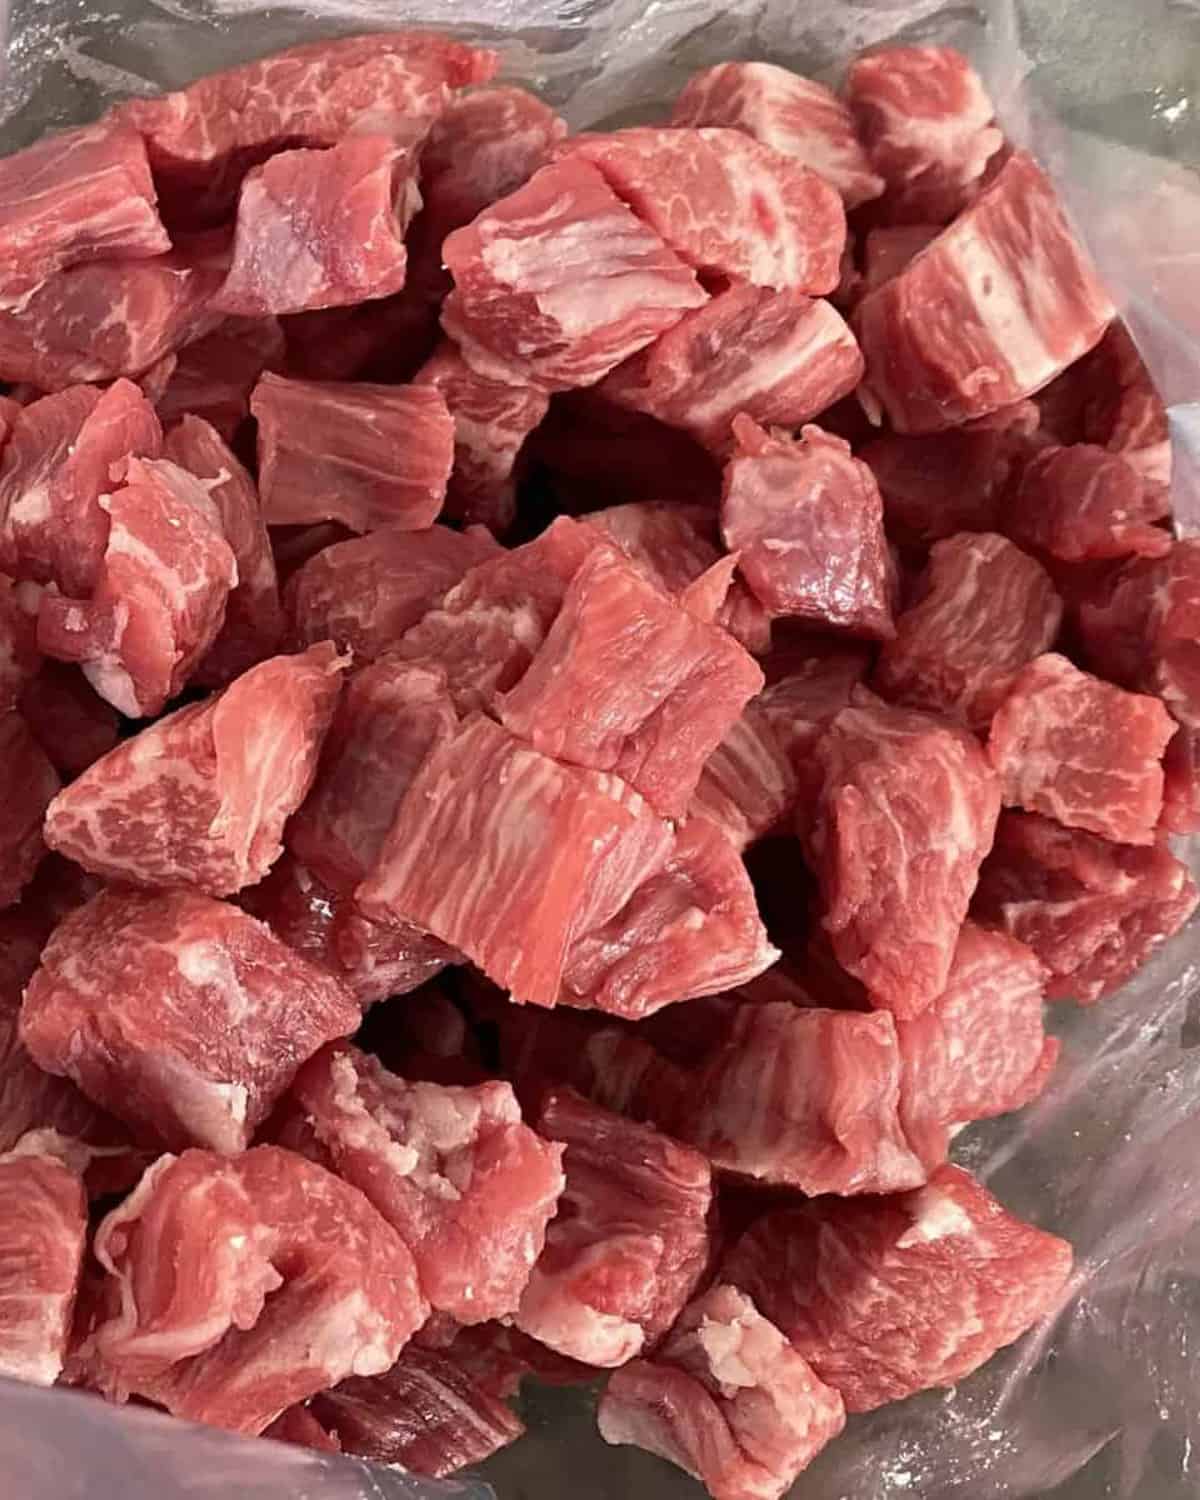 Beef chopped into bite-sized pieces.